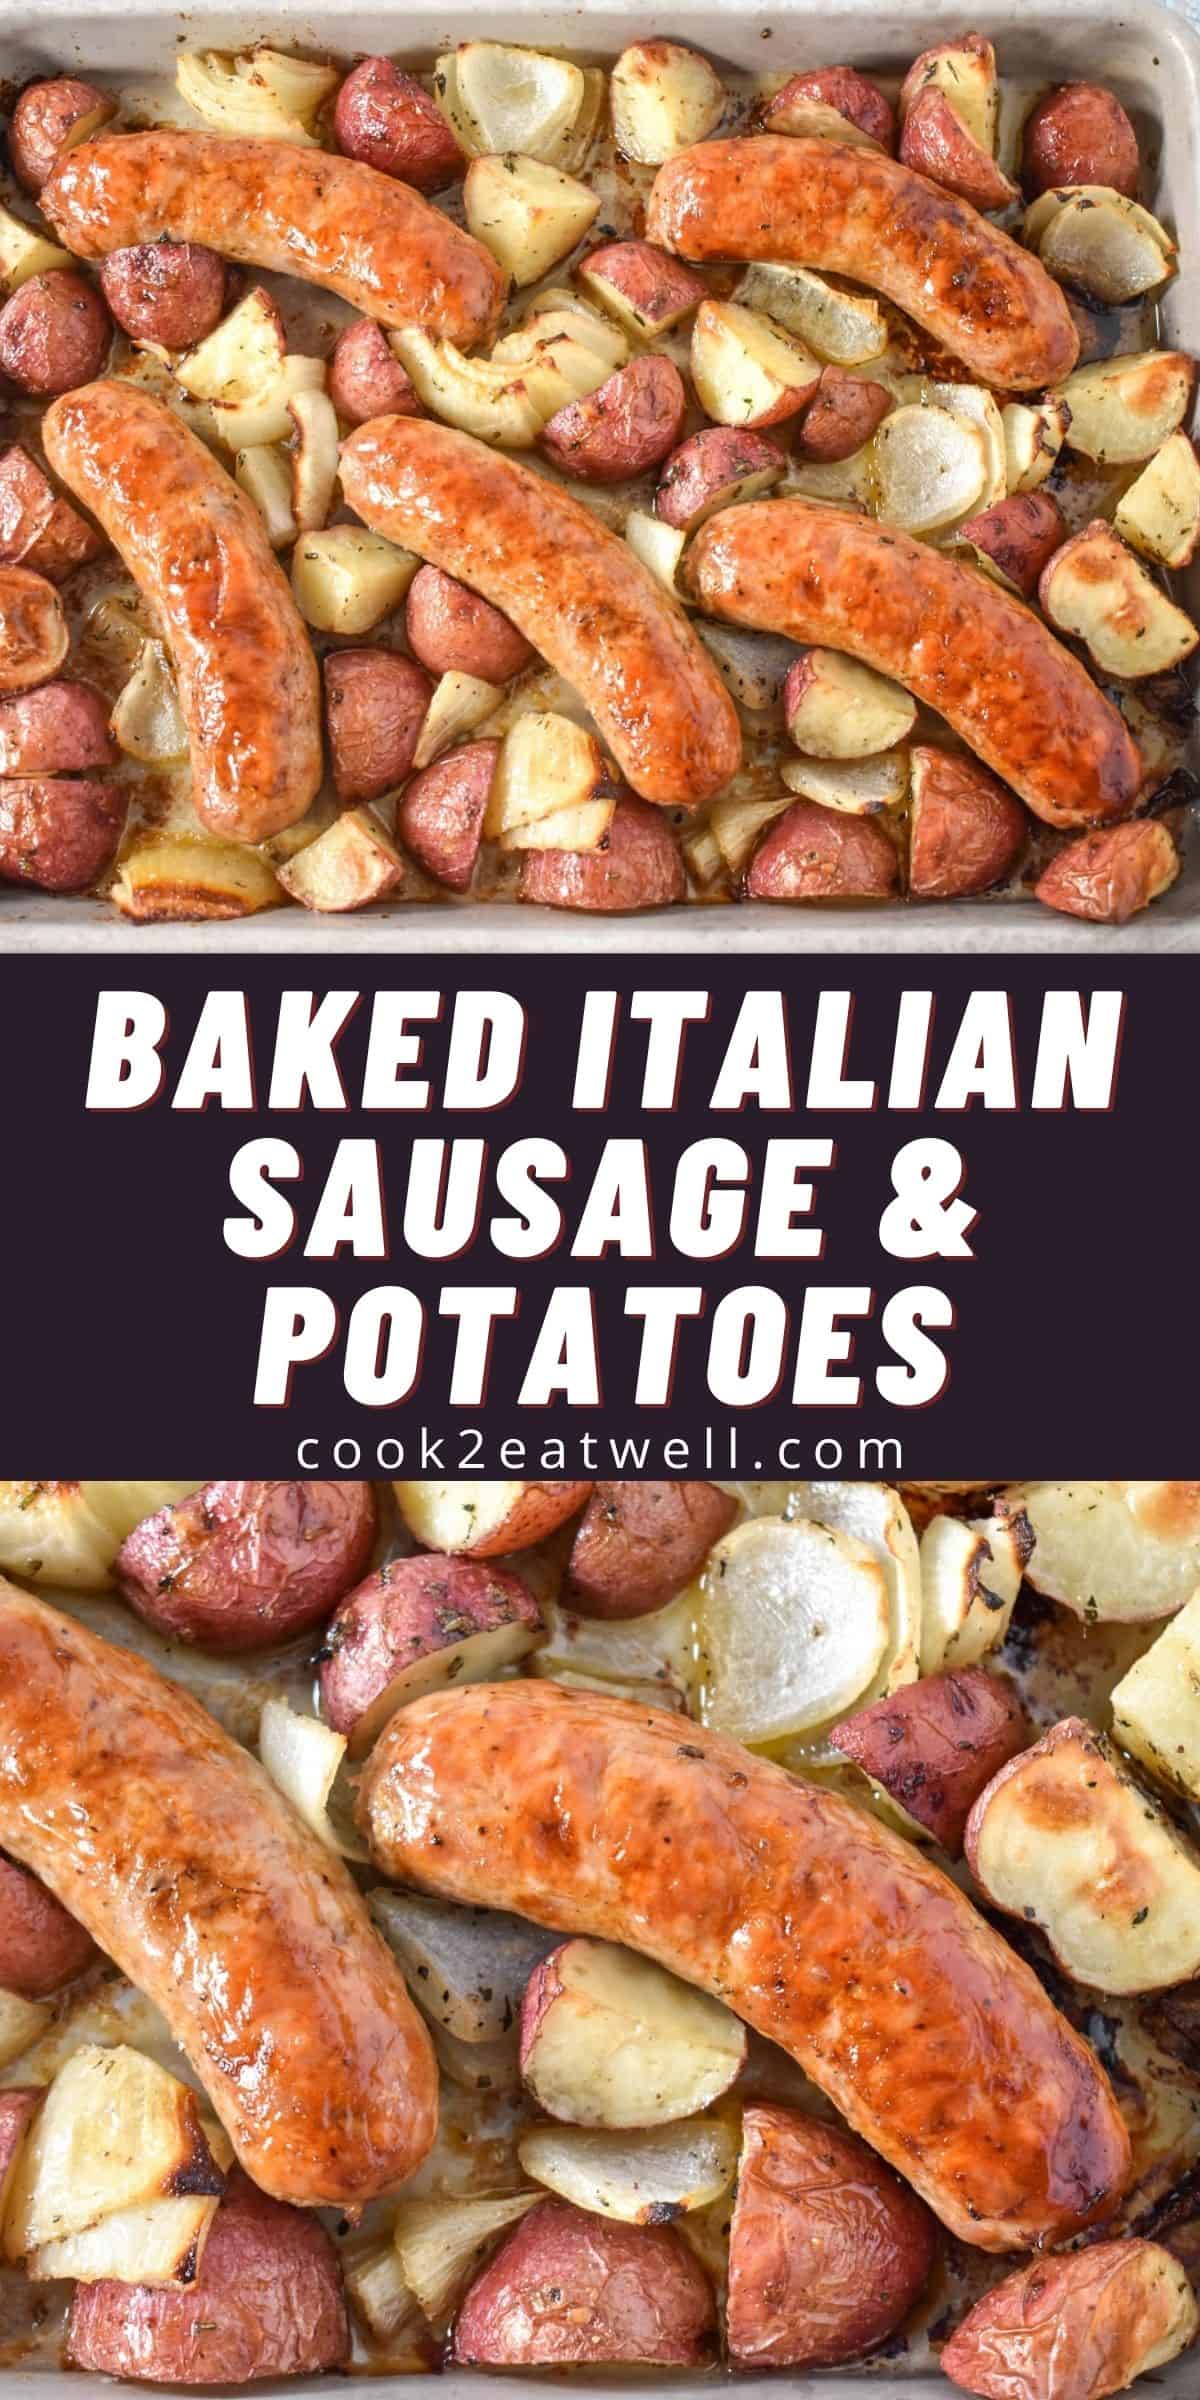 Baked Italian Sausage and Potatoes - Cook2eatwell